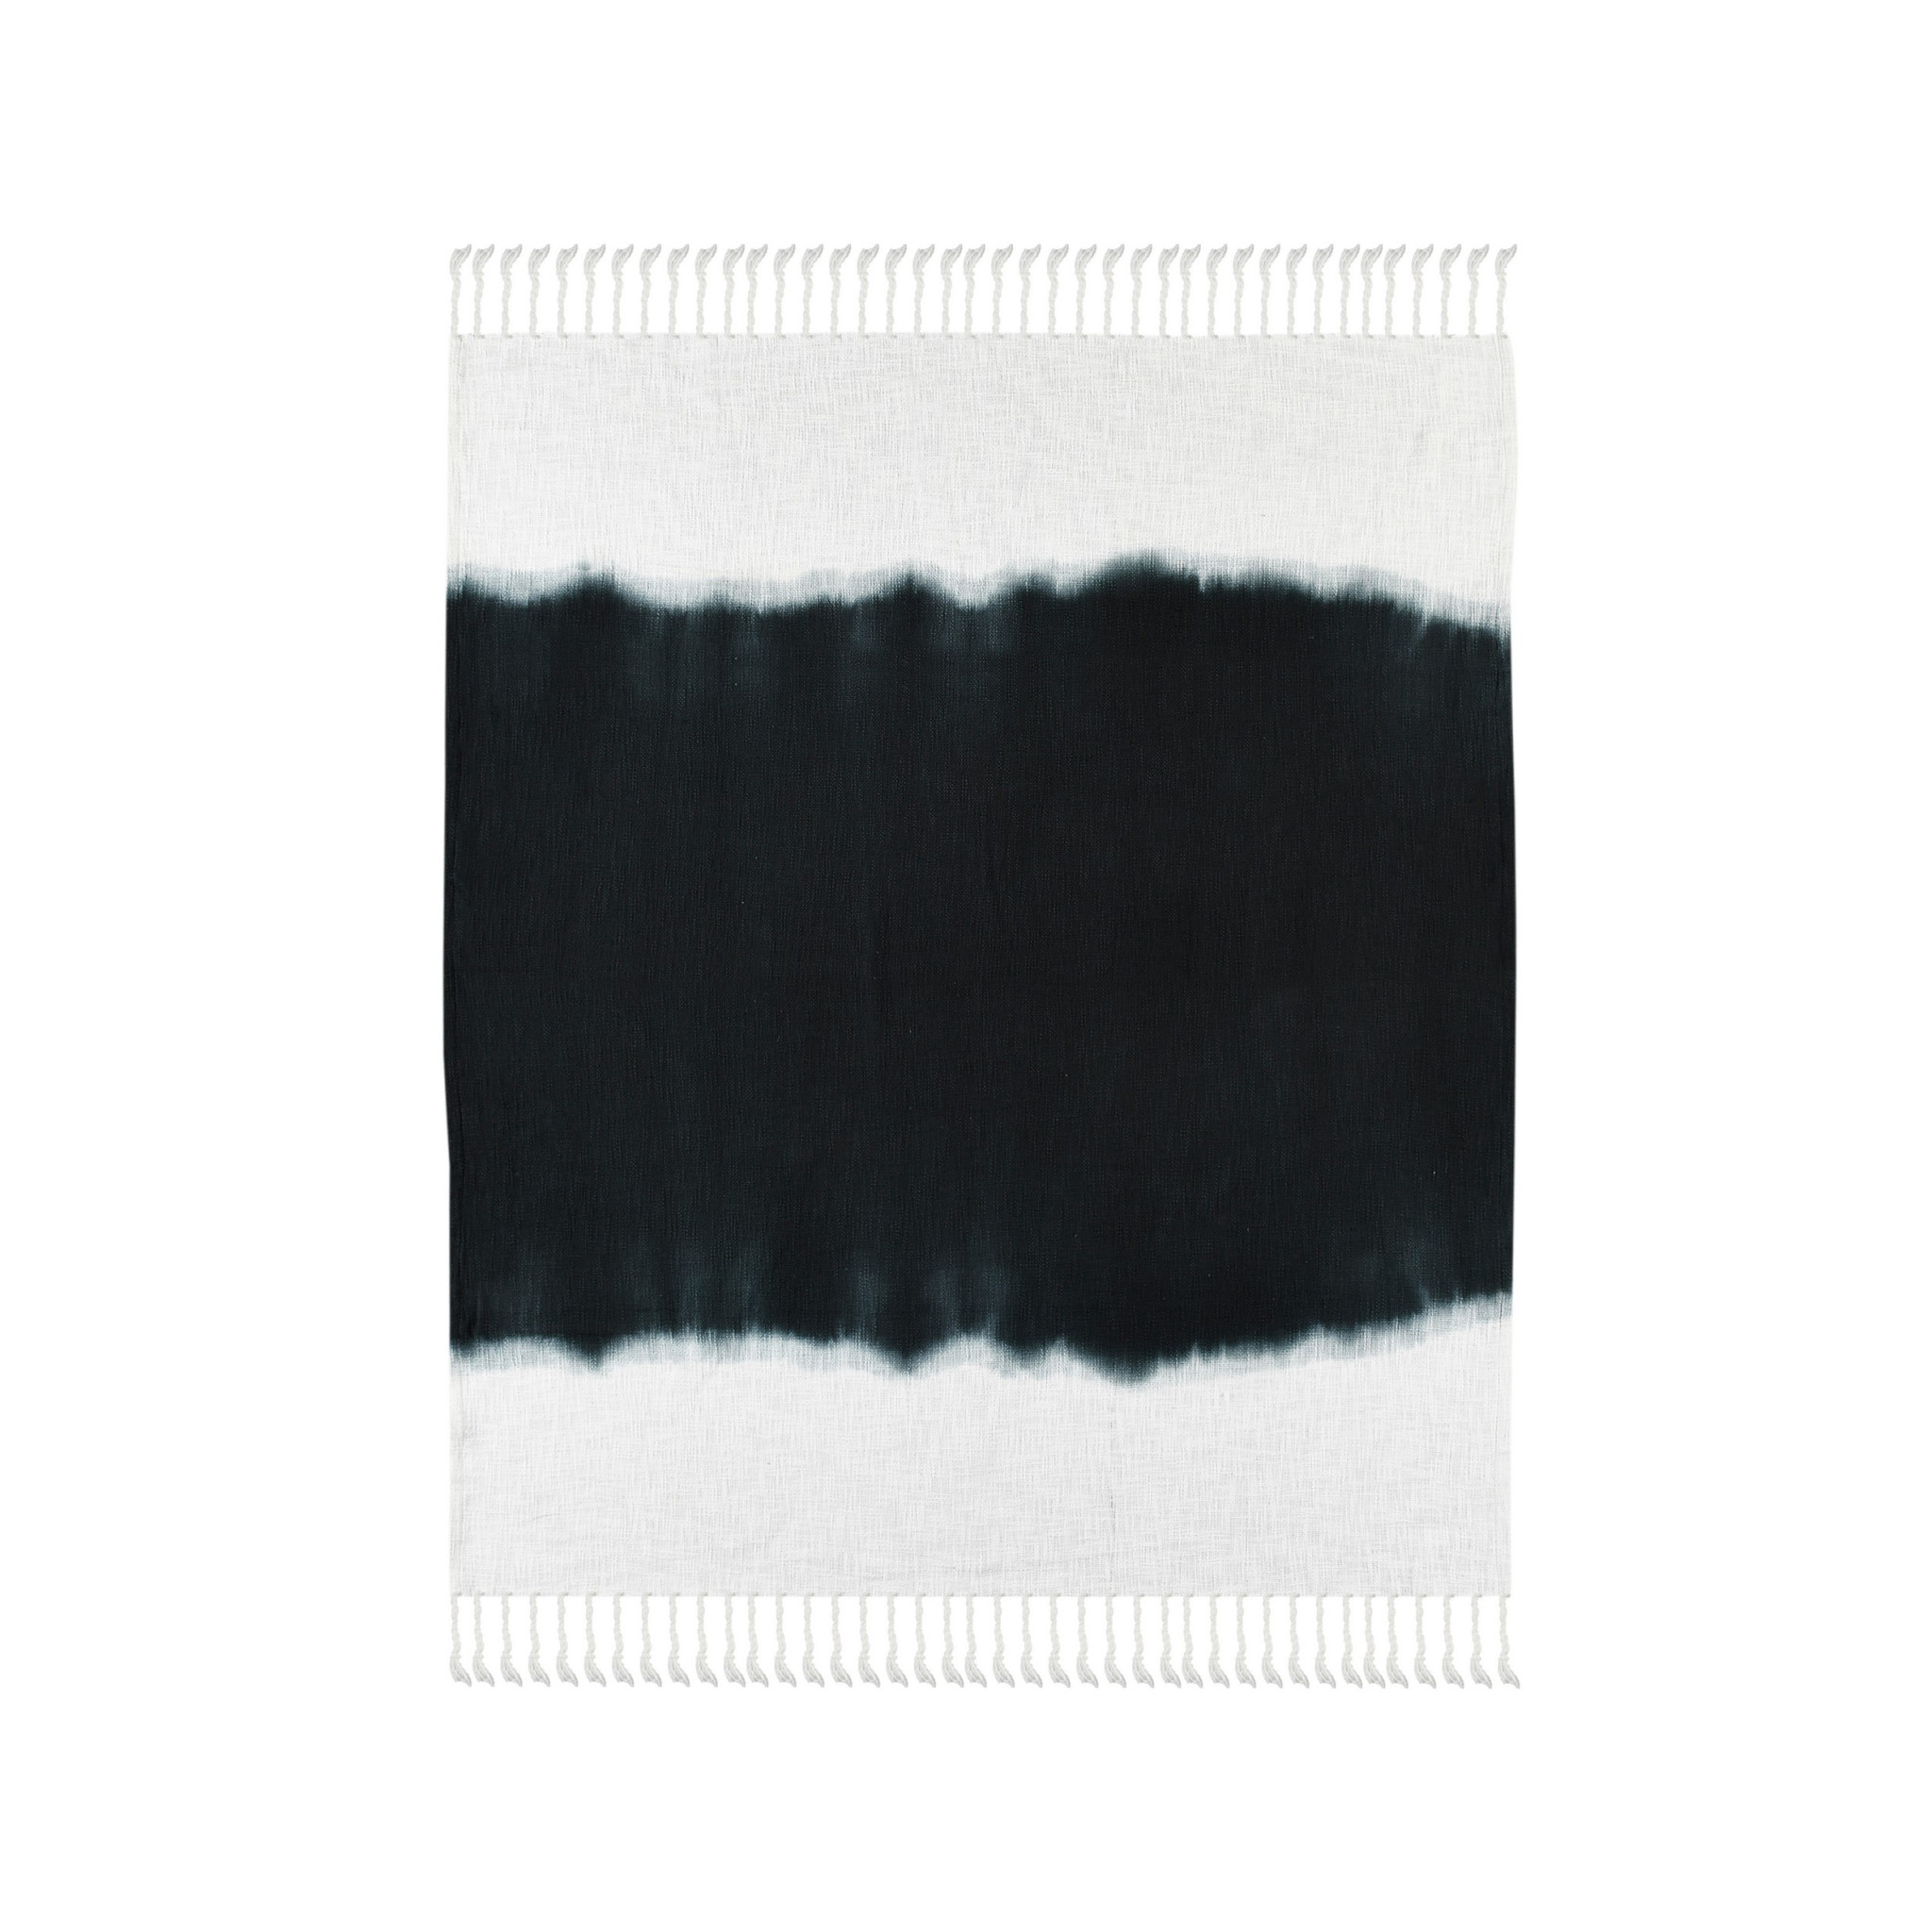 Black and White Woven Cotton Ombre Throw Blanket-516579-1